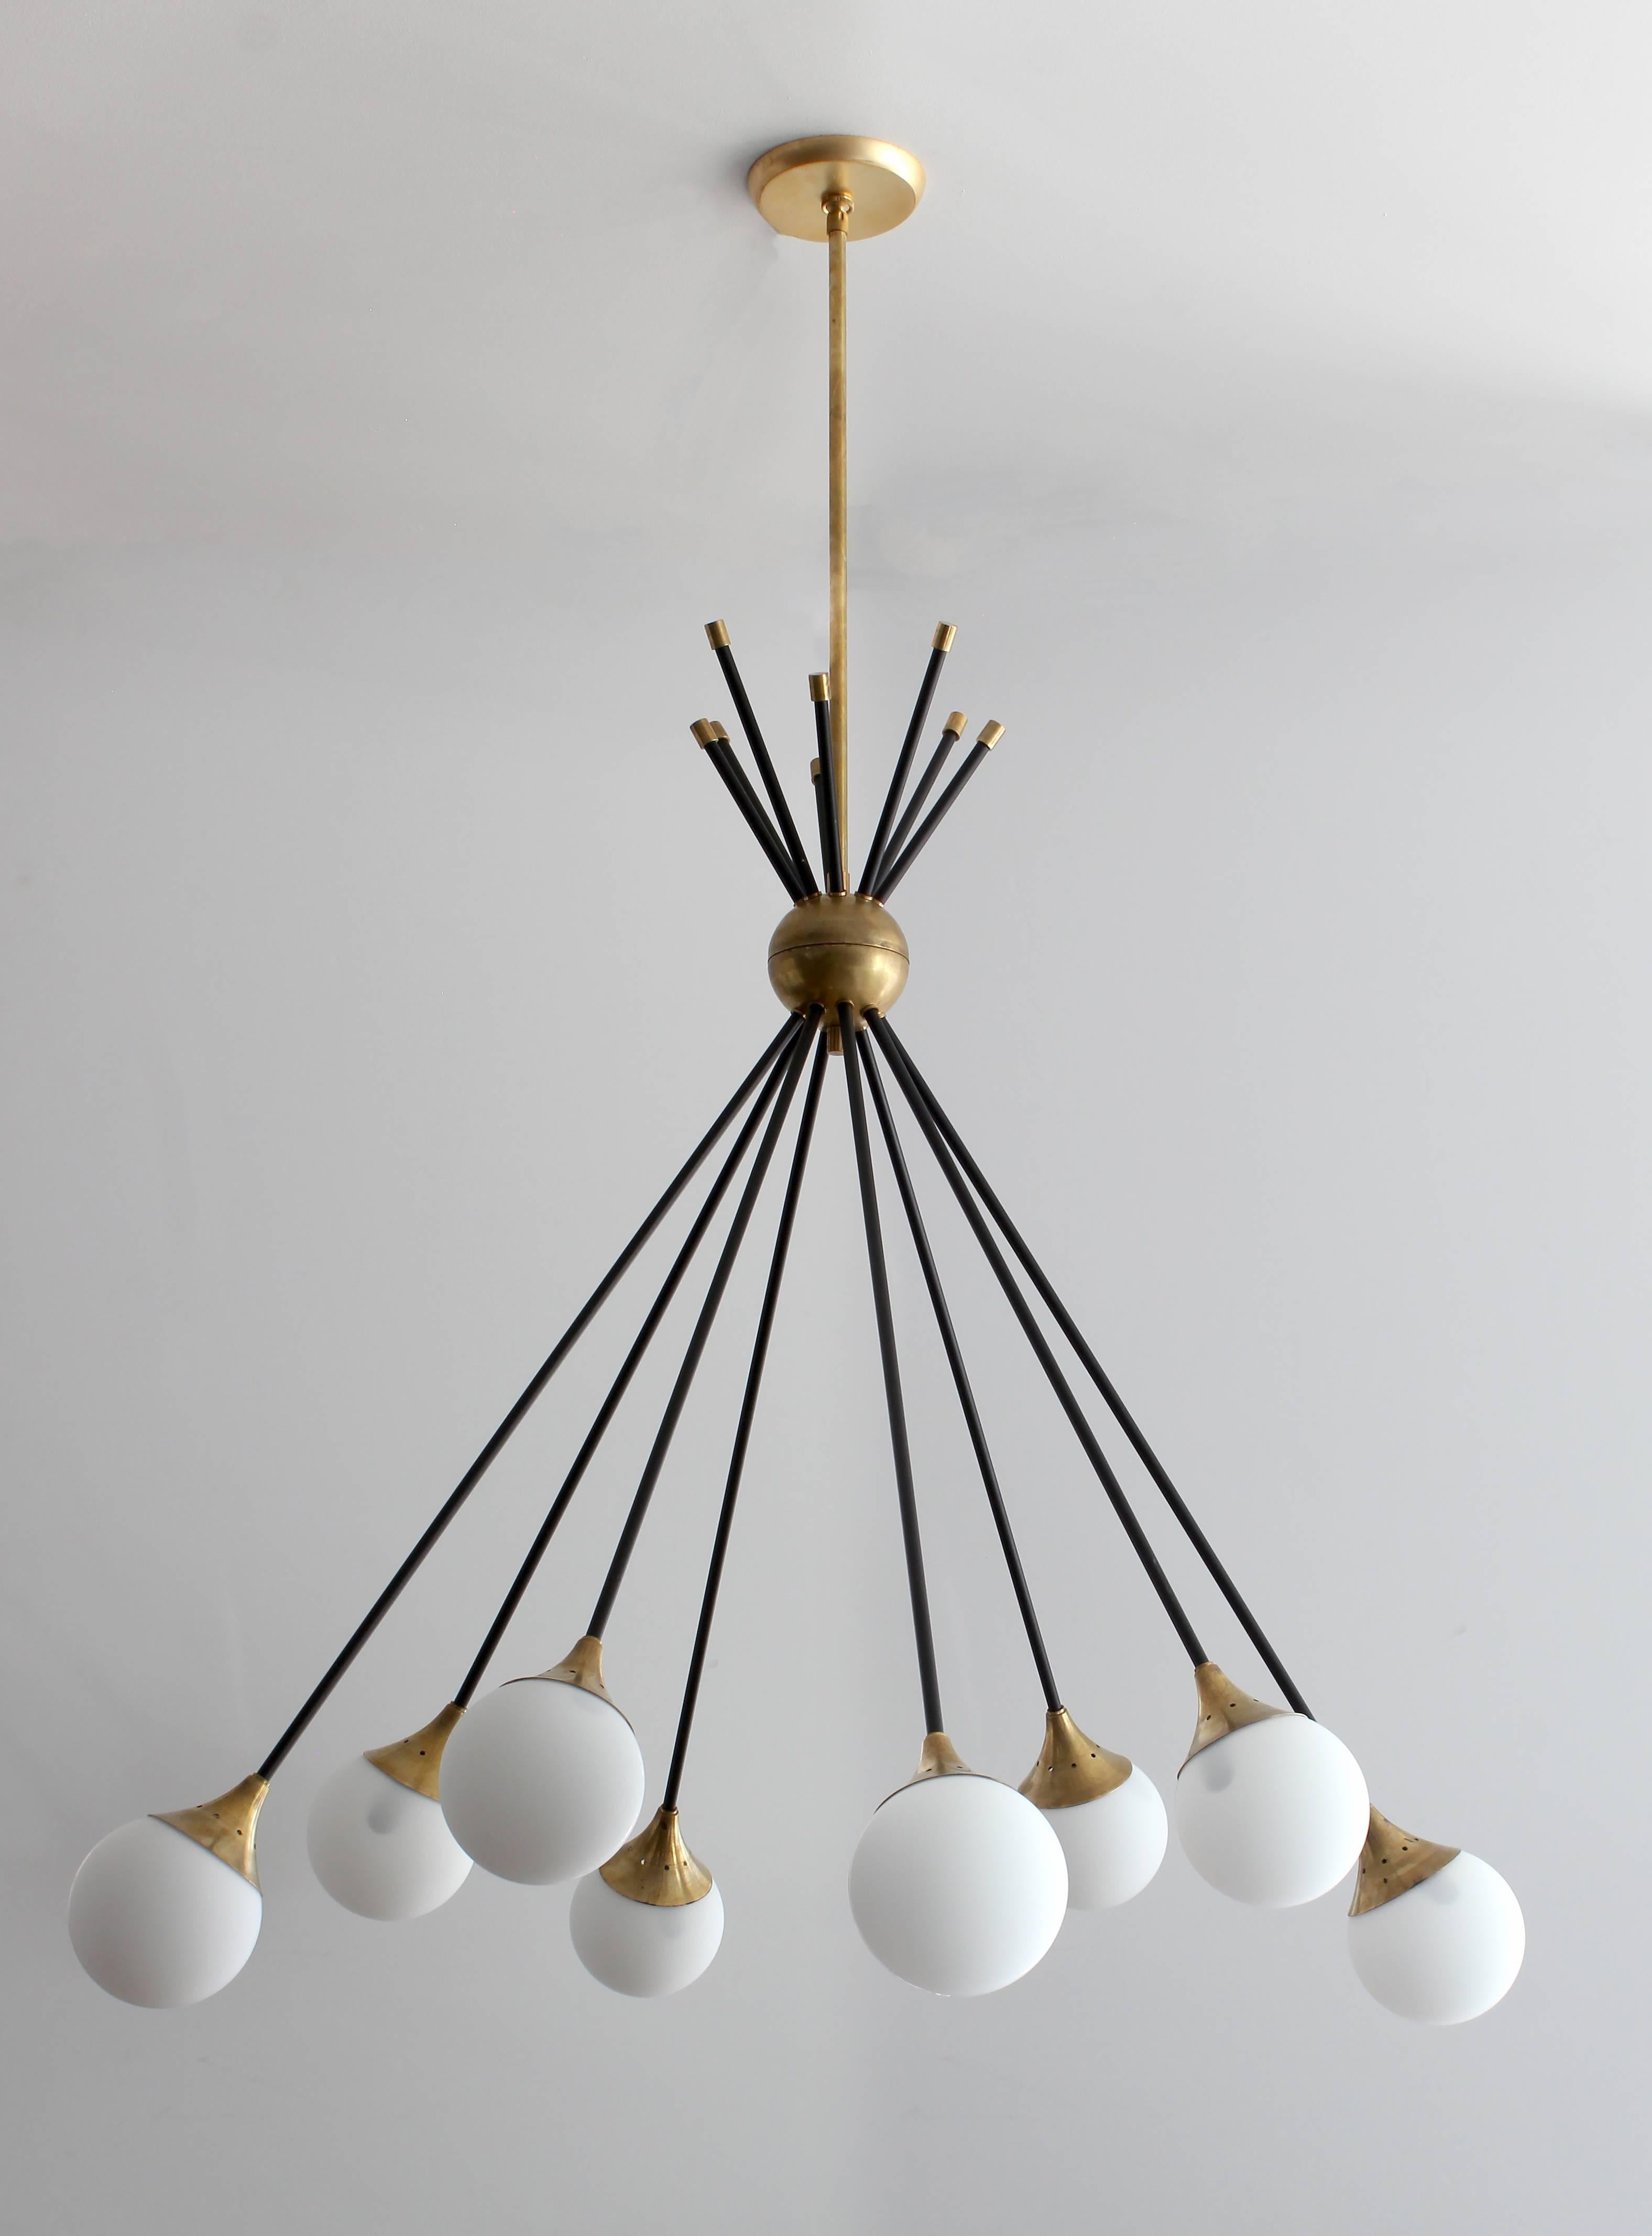 Exceptional Italian chandelier with signature Stilnovo style opaline glass globes and spring clasps in a dramatic drop down direction.  
Newly produced in Italy and rewired by Orange.
Includes eight opaline globe bulbs. 